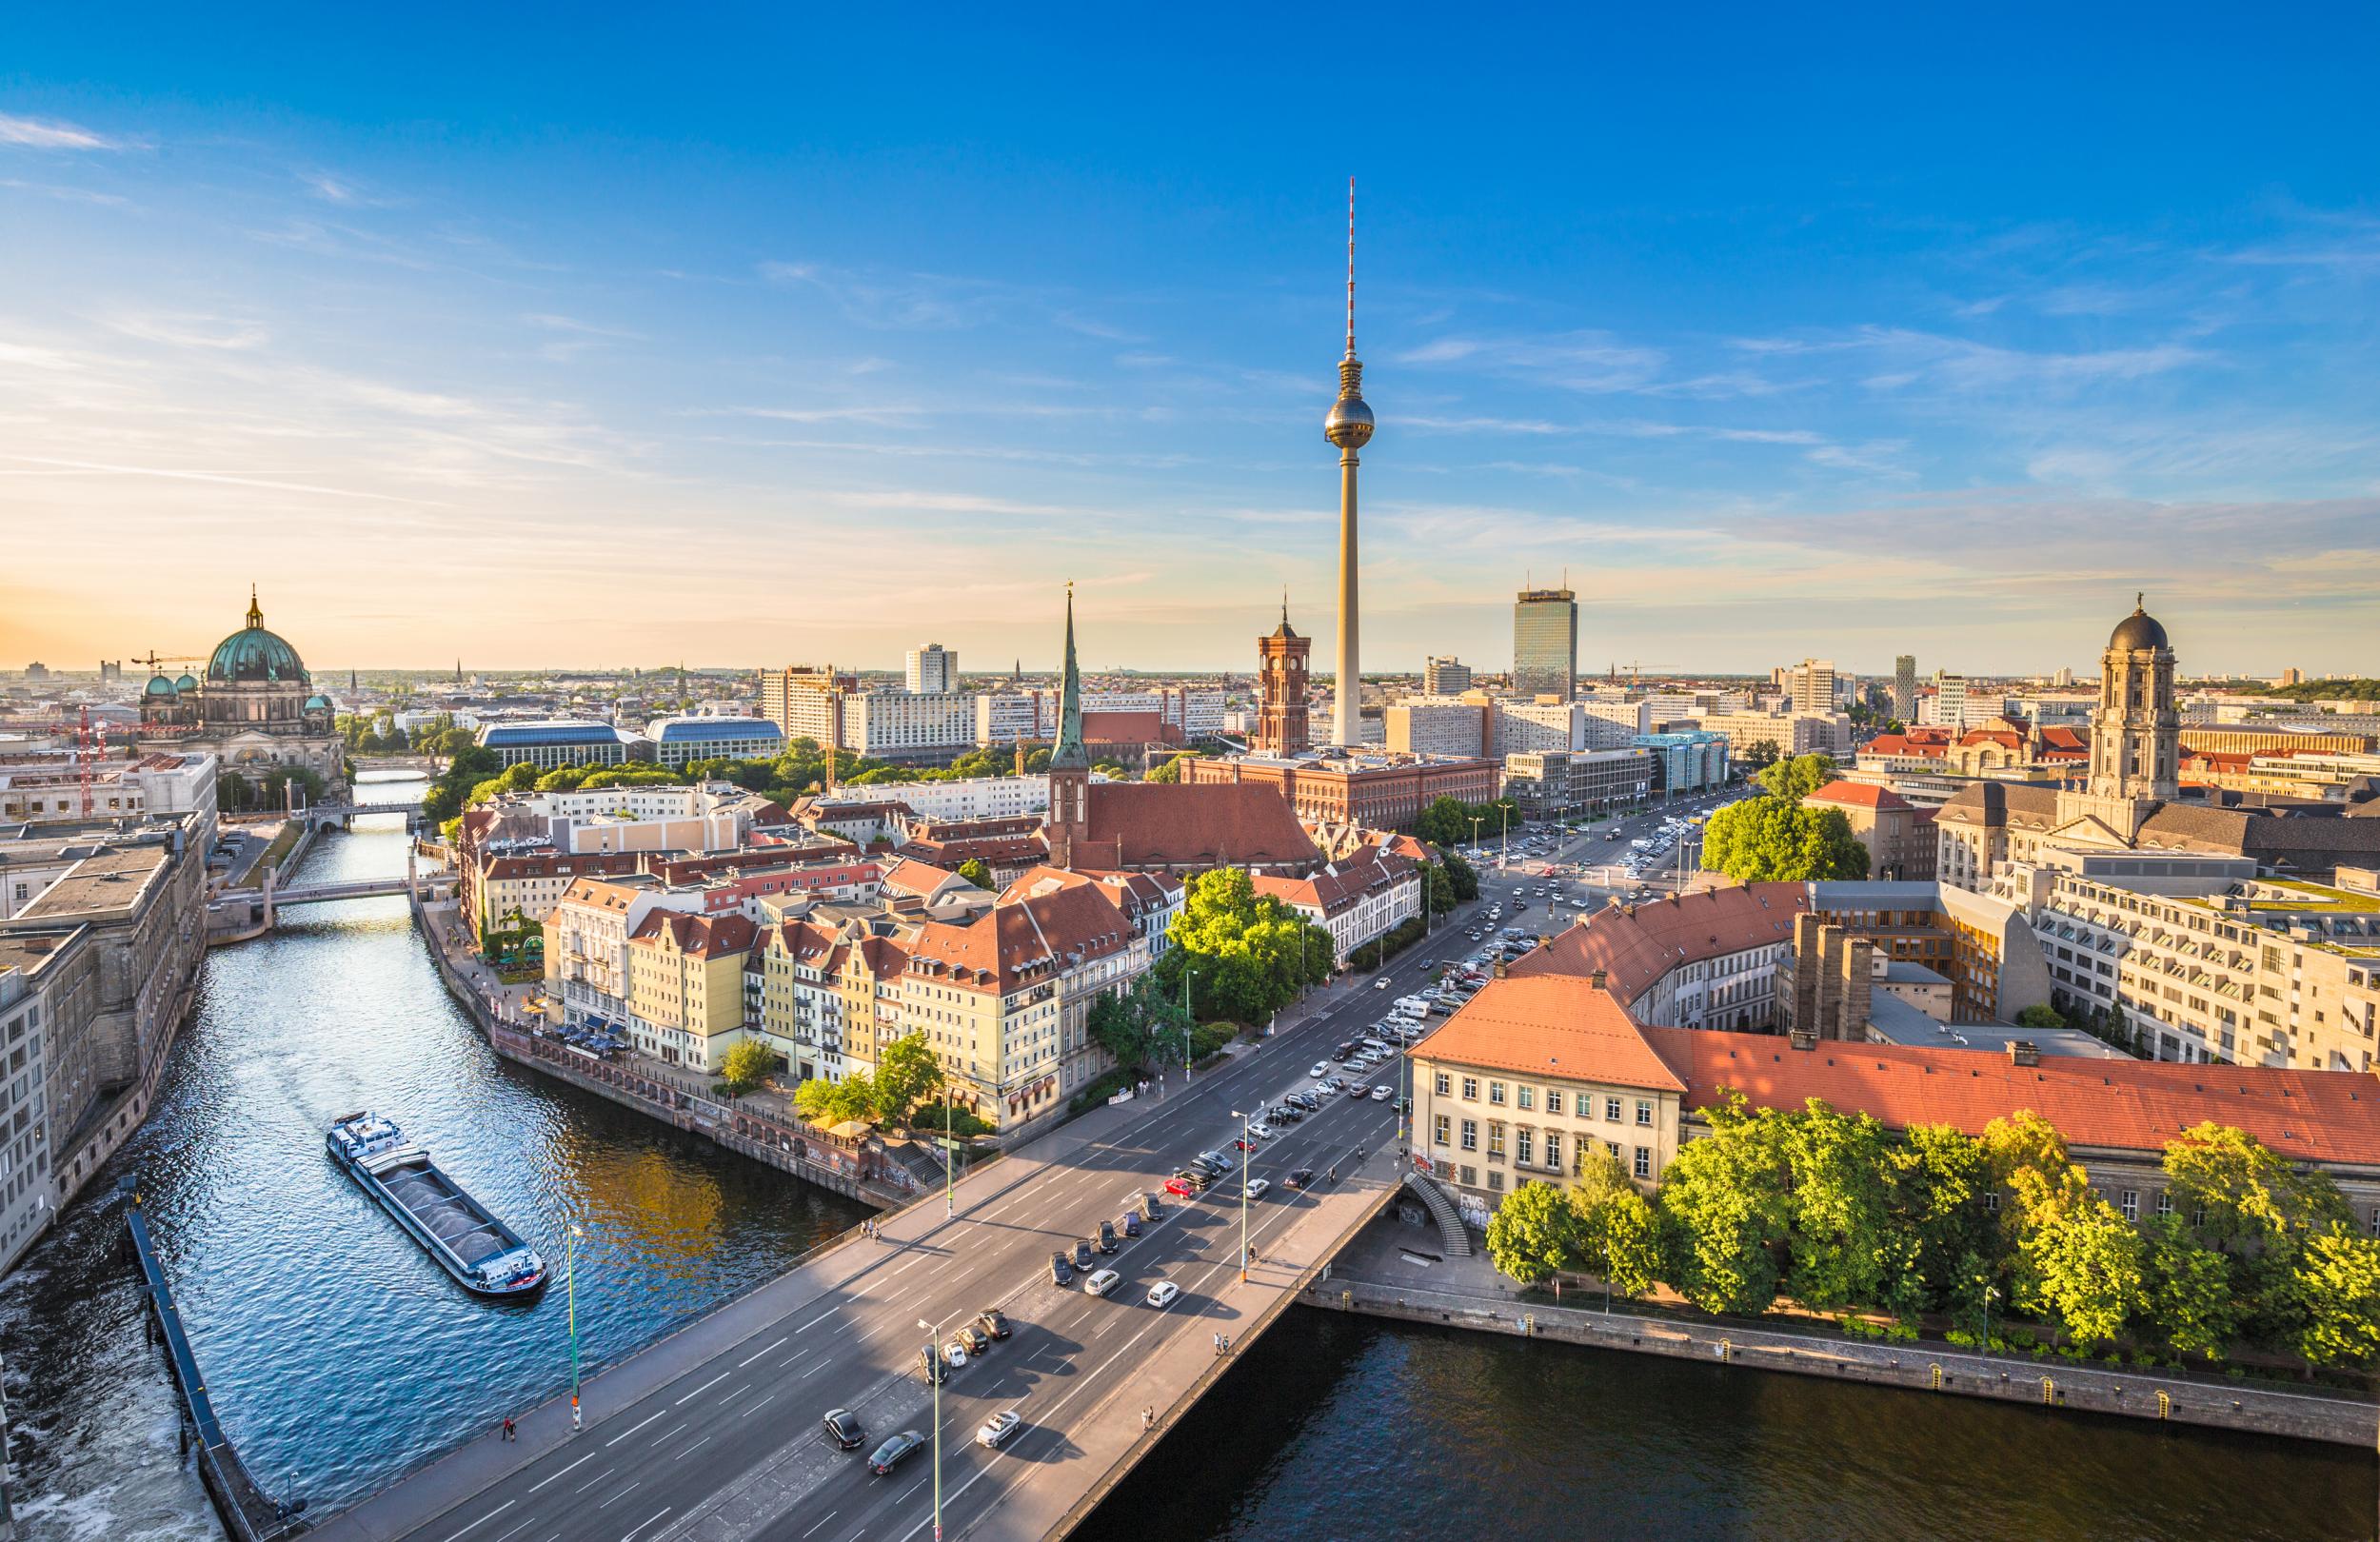 Berlin is a city packed with history, culture and perfect for a city break